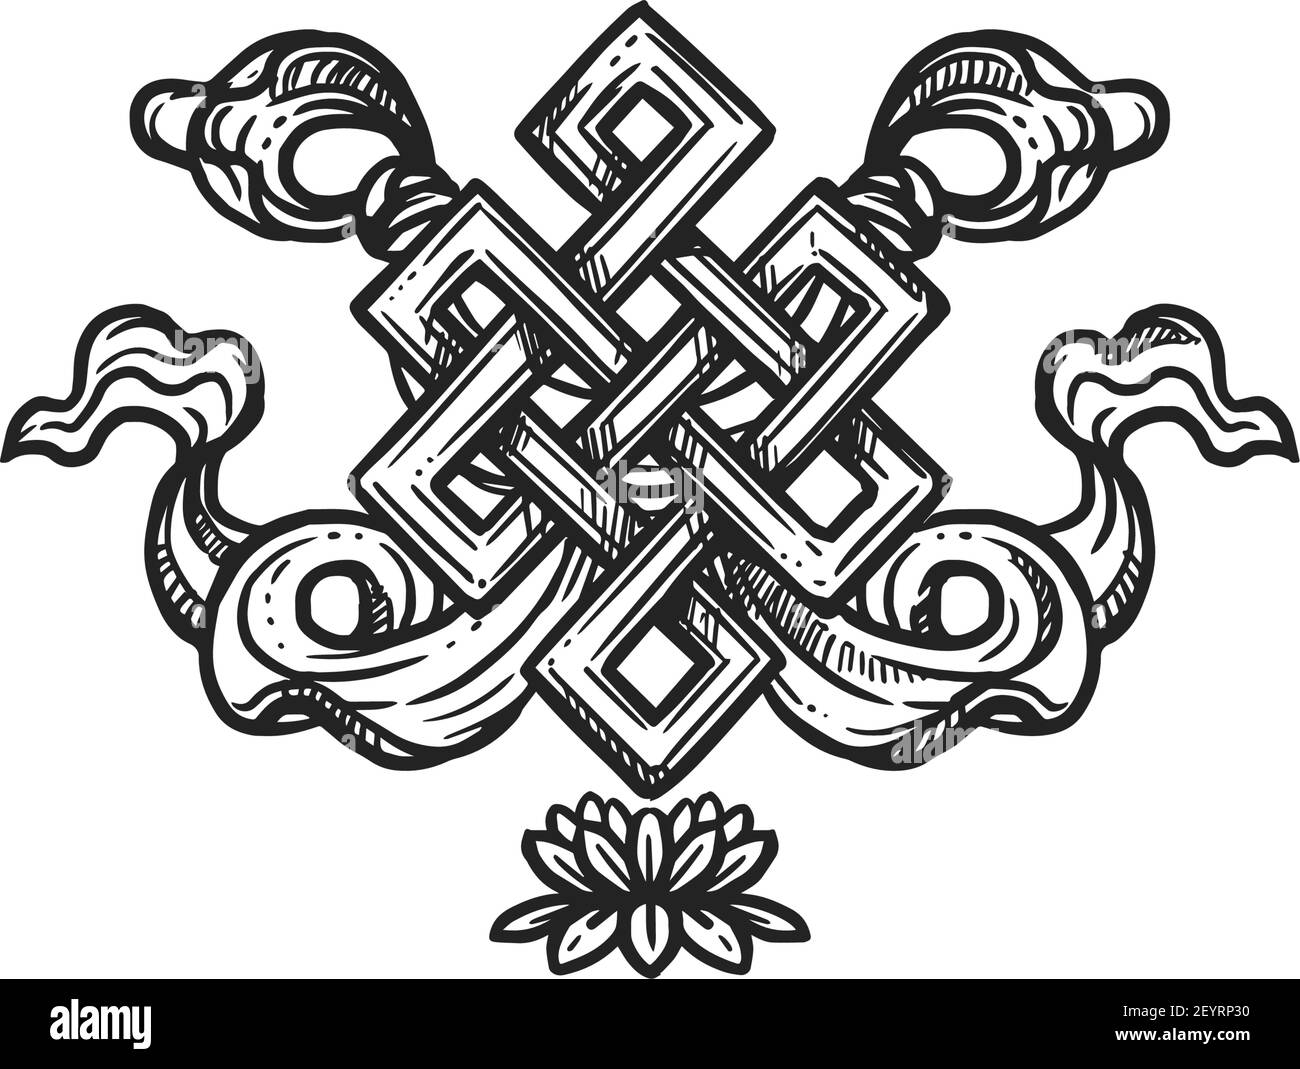 Buddhist knot Stock Vector Images - Alamy